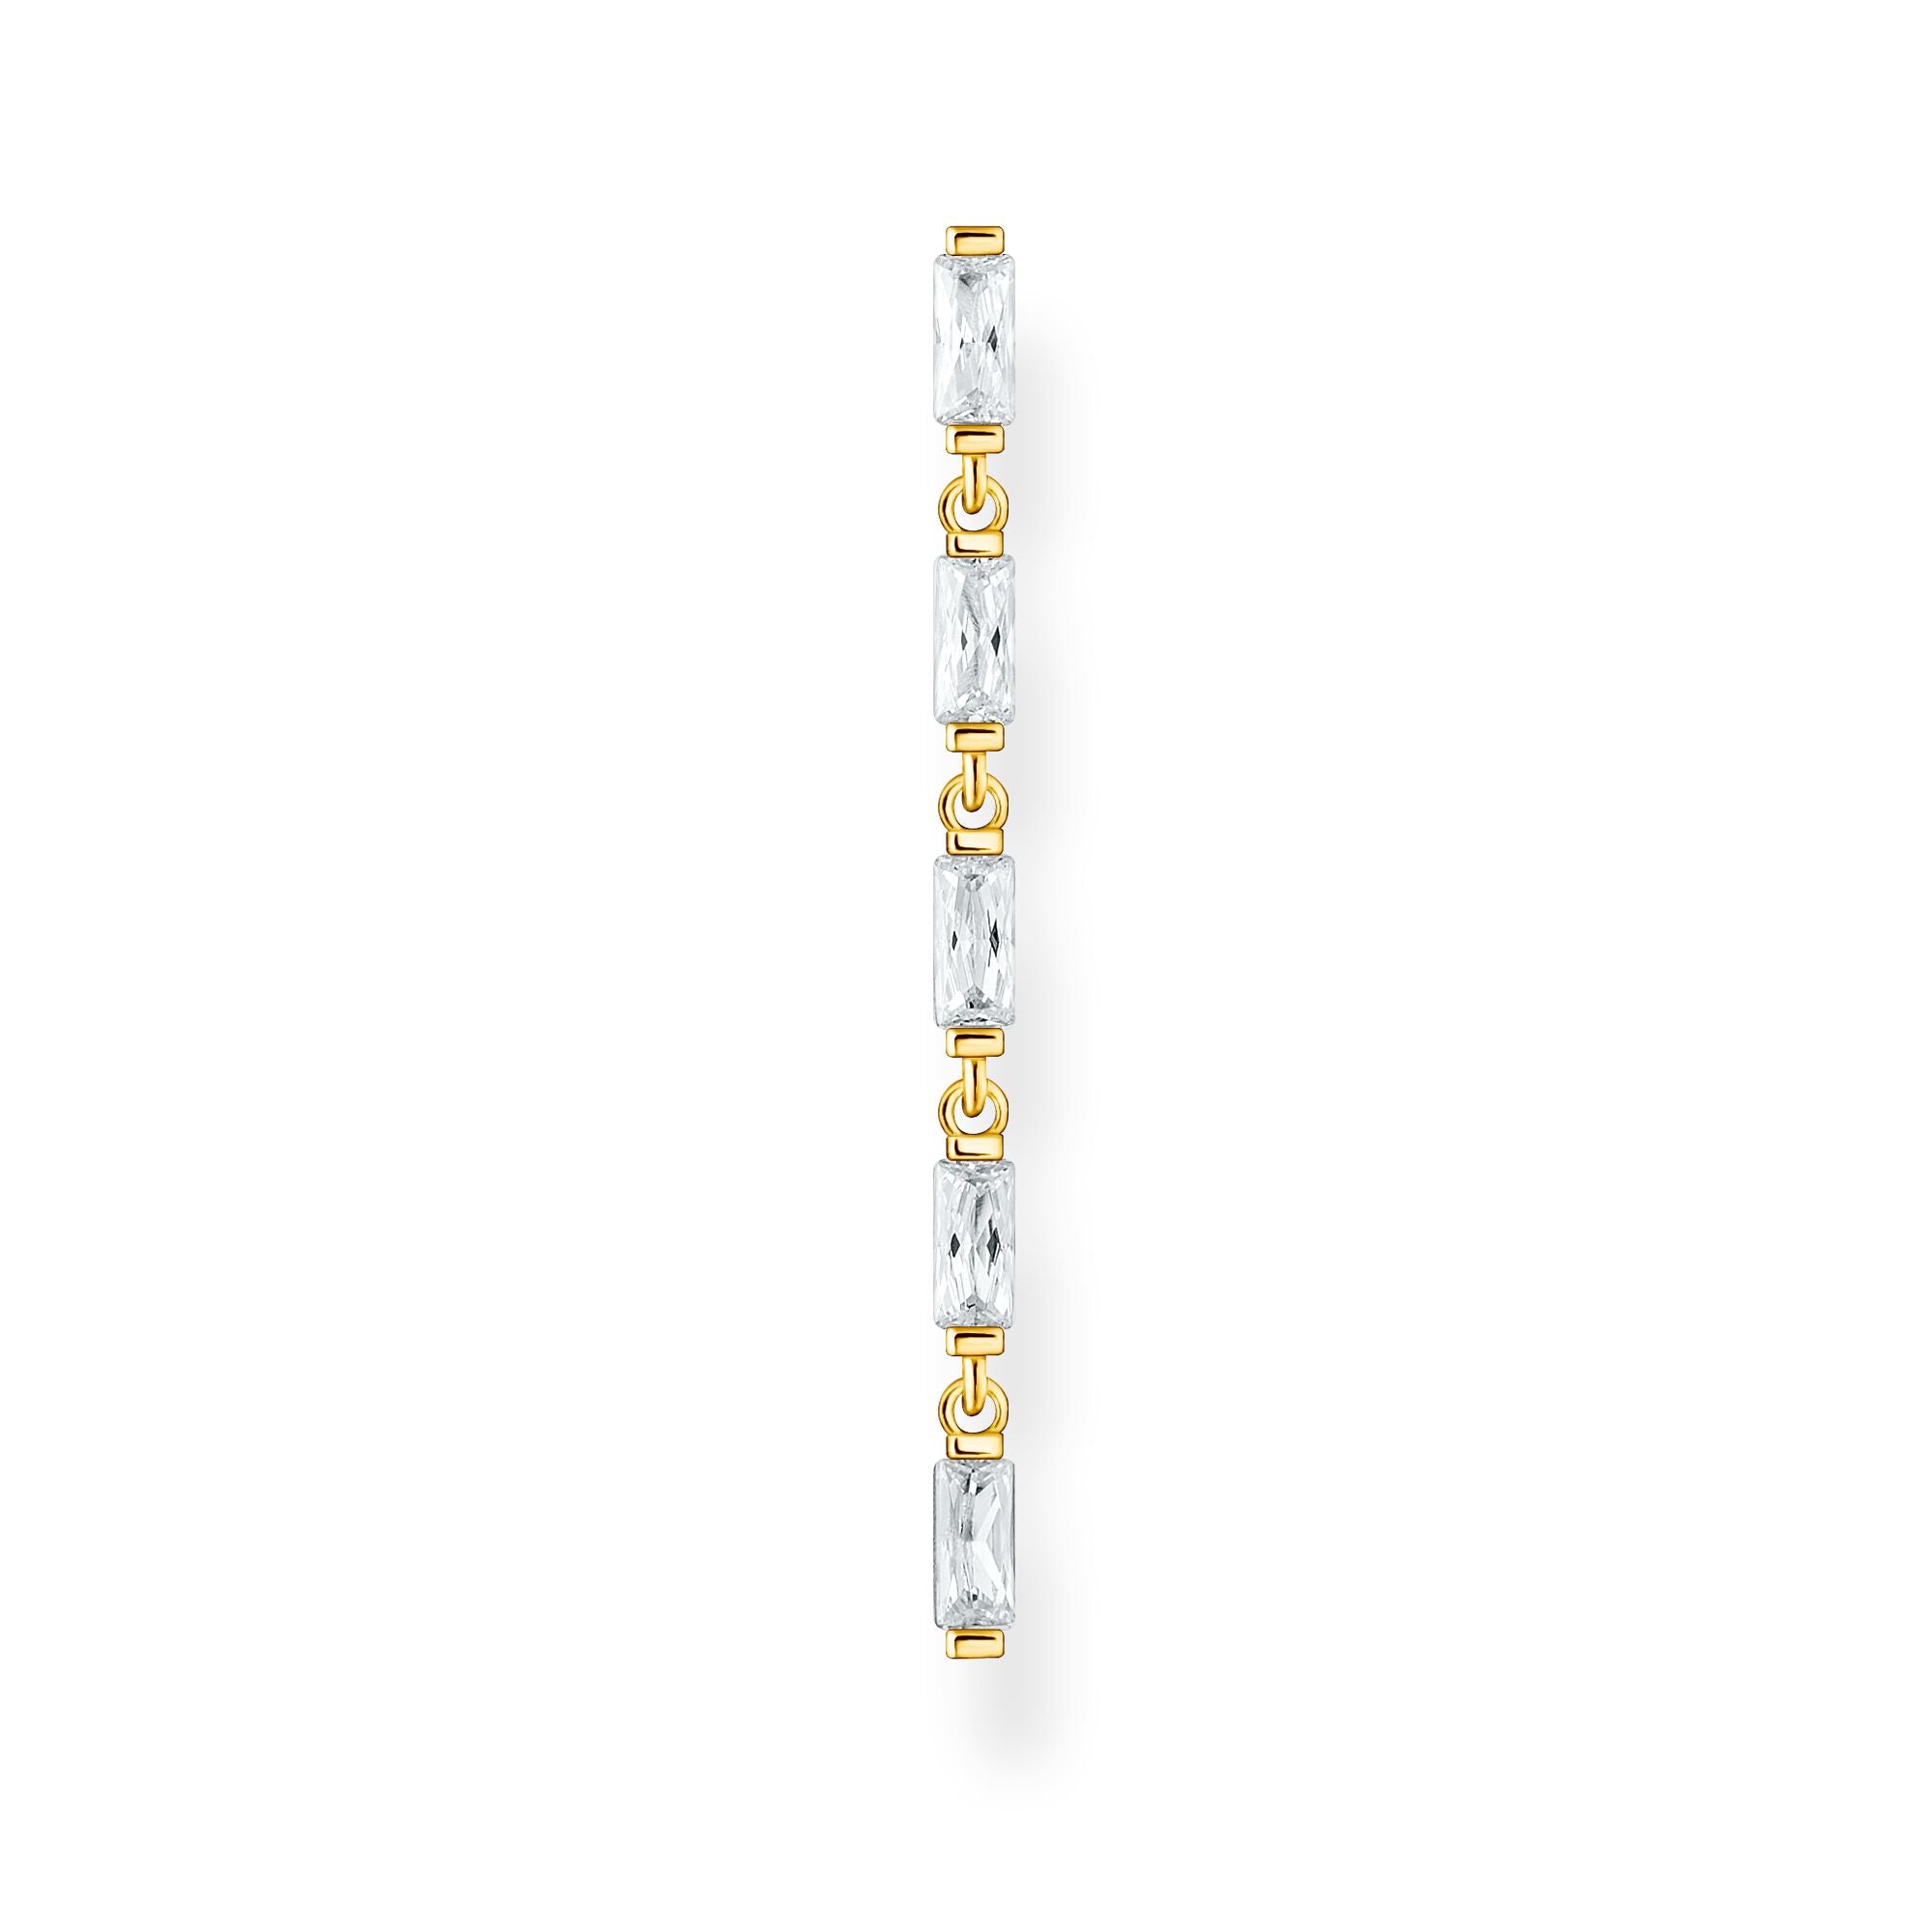 Thomas Sabo 18k yellow gold plated sterling silver, 5 white baguette cz dangle, single stud earring